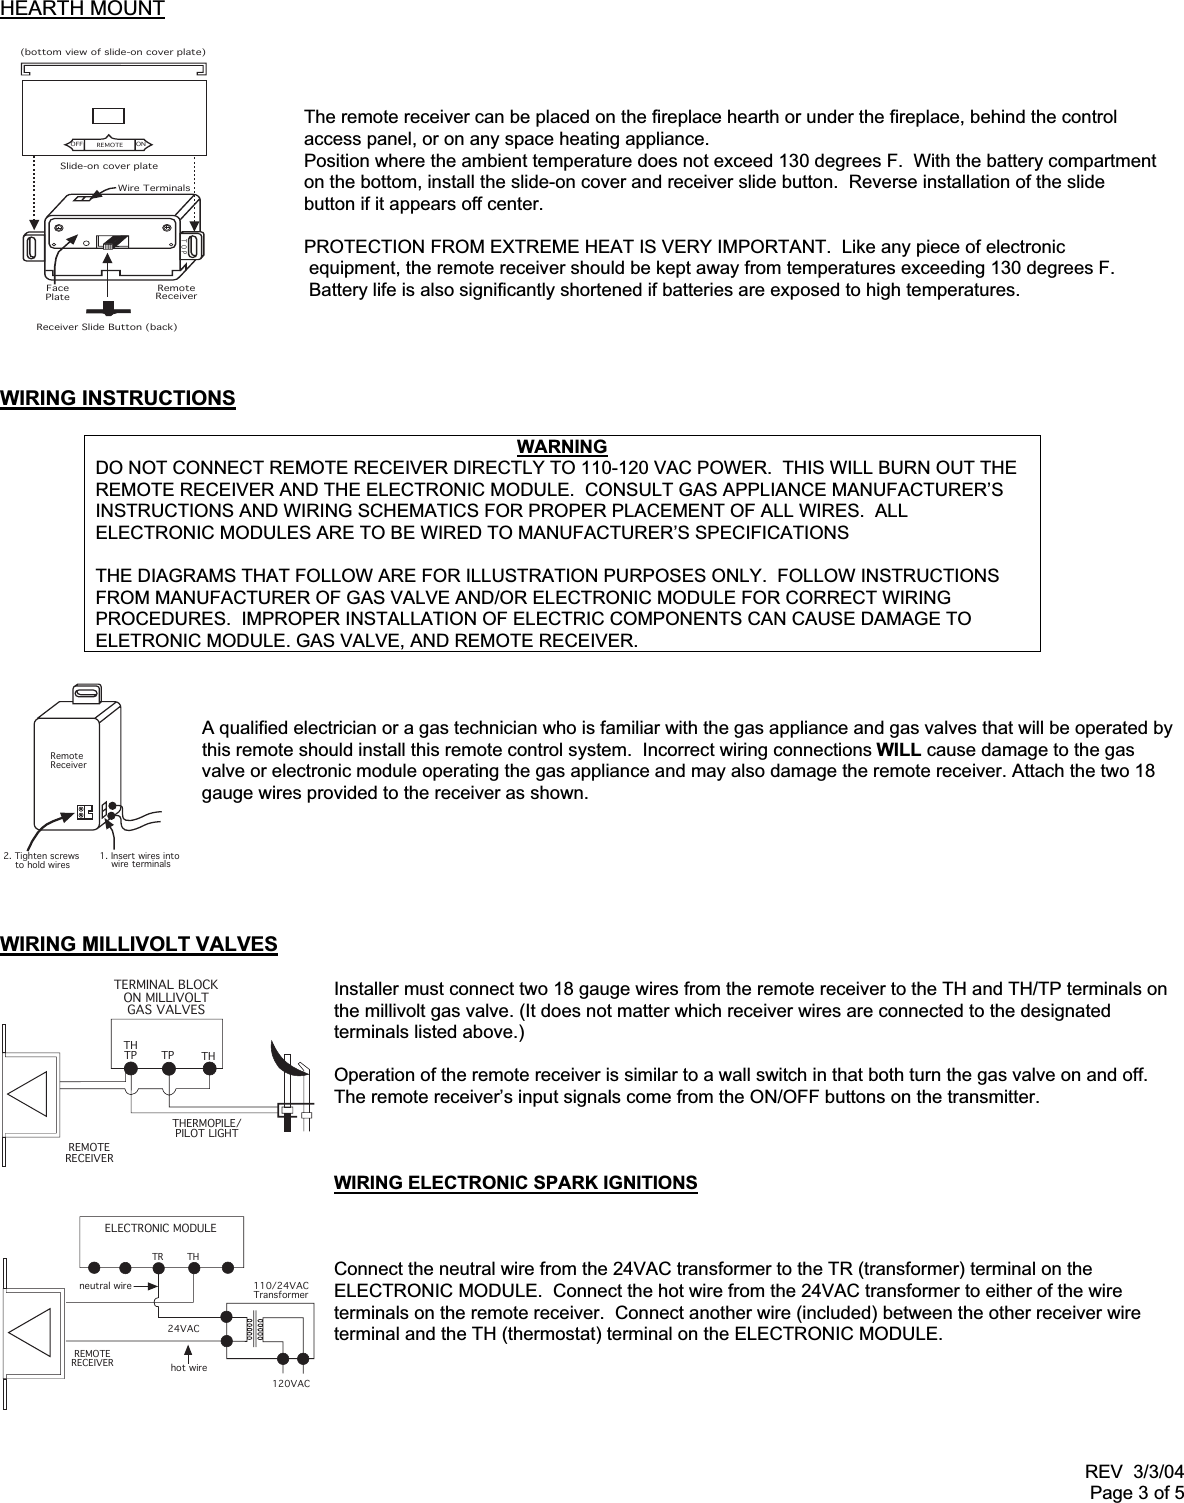 REV  3/3/04Page 3 of 5REMOTEONOFFSlide-on cover plateTOPRemoteReceiver(bottom view of slide-on cover plate)FacePlateReceiver Slide Button (back)Wire TerminalsRemoteReceiver2. Tighten screws    to hold wires1. Insert wires into    wire terminalsELECTRONIC MODULETR THREMOTERECEIVERneutral wire24VAChot wire120VAC110/24VACTransformerTERMINAL BLOCKON MILLIVOLTGAS VALVESTHTP TP THTHERMOPILE/PILOT LIGHTREMOTERECEIVERHEARTH MOUNTThe remote receiver can be placed on the fireplace hearth or under the fireplace, behind the controlaccess panel, or on any space heating appliance.Position where the ambient temperature does not exceed 130 degrees F.  With the battery compartmenton the bottom, install the slide-on cover and receiver slide button.  Reverse installation of the slidebutton if it appears off center.PROTECTION FROM EXTREME HEAT IS VERY IMPORTANT.  Like any piece of electronic equipment, the remote receiver should be kept away from temperatures exceeding 130 degrees F. Battery life is also significantly shortened if batteries are exposed to high temperatures.WIRING INSTRUCTIONSWARNINGDO NOT CONNECT REMOTE RECEIVER DIRECTLY TO 110-120 VAC POWER.  THIS WILL BURN OUT THEREMOTE RECEIVER AND THE ELECTRONIC MODULE.  CONSULT GAS APPLIANCE MANUFACTURER’SINSTRUCTIONS AND WIRING SCHEMATICS FOR PROPER PLACEMENT OF ALL WIRES.  ALLELECTRONIC MODULES ARE TO BE WIRED TO MANUFACTURER’S SPECIFICATIONSTHE DIAGRAMS THAT FOLLOW ARE FOR ILLUSTRATION PURPOSES ONLY.  FOLLOW INSTRUCTIONSFROM MANUFACTURER OF GAS VALVE AND/OR ELECTRONIC MODULE FOR CORRECT WIRINGPROCEDURES.  IMPROPER INSTALLATION OF ELECTRIC COMPONENTS CAN CAUSE DAMAGE TOELETRONIC MODULE. GAS VALVE, AND REMOTE RECEIVER.A qualified electrician or a gas technician who is familiar with the gas appliance and gas valves that will be operated bythis remote should install this remote control system.  Incorrect wiring connections WILL cause damage to the gasvalve or electronic module operating the gas appliance and may also damage the remote receiver. Attach the two 18gauge wires provided to the receiver as shown.WIRING MILLIVOLT VALVESInstaller must connect two 18 gauge wires from the remote receiver to the TH and TH/TP terminals onthe millivolt gas valve. (It does not matter which receiver wires are connected to the designatedterminals listed above.)Operation of the remote receiver is similar to a wall switch in that both turn the gas valve on and off.The remote receiver’s input signals come from the ON/OFF buttons on the transmitter.WIRING ELECTRONIC SPARK IGNITIONSConnect the neutral wire from the 24VAC transformer to the TR (transformer) terminal on theELECTRONIC MODULE.  Connect the hot wire from the 24VAC transformer to either of the wireterminals on the remote receiver.  Connect another wire (included) between the other receiver wireterminal and the TH (thermostat) terminal on the ELECTRONIC MODULE.